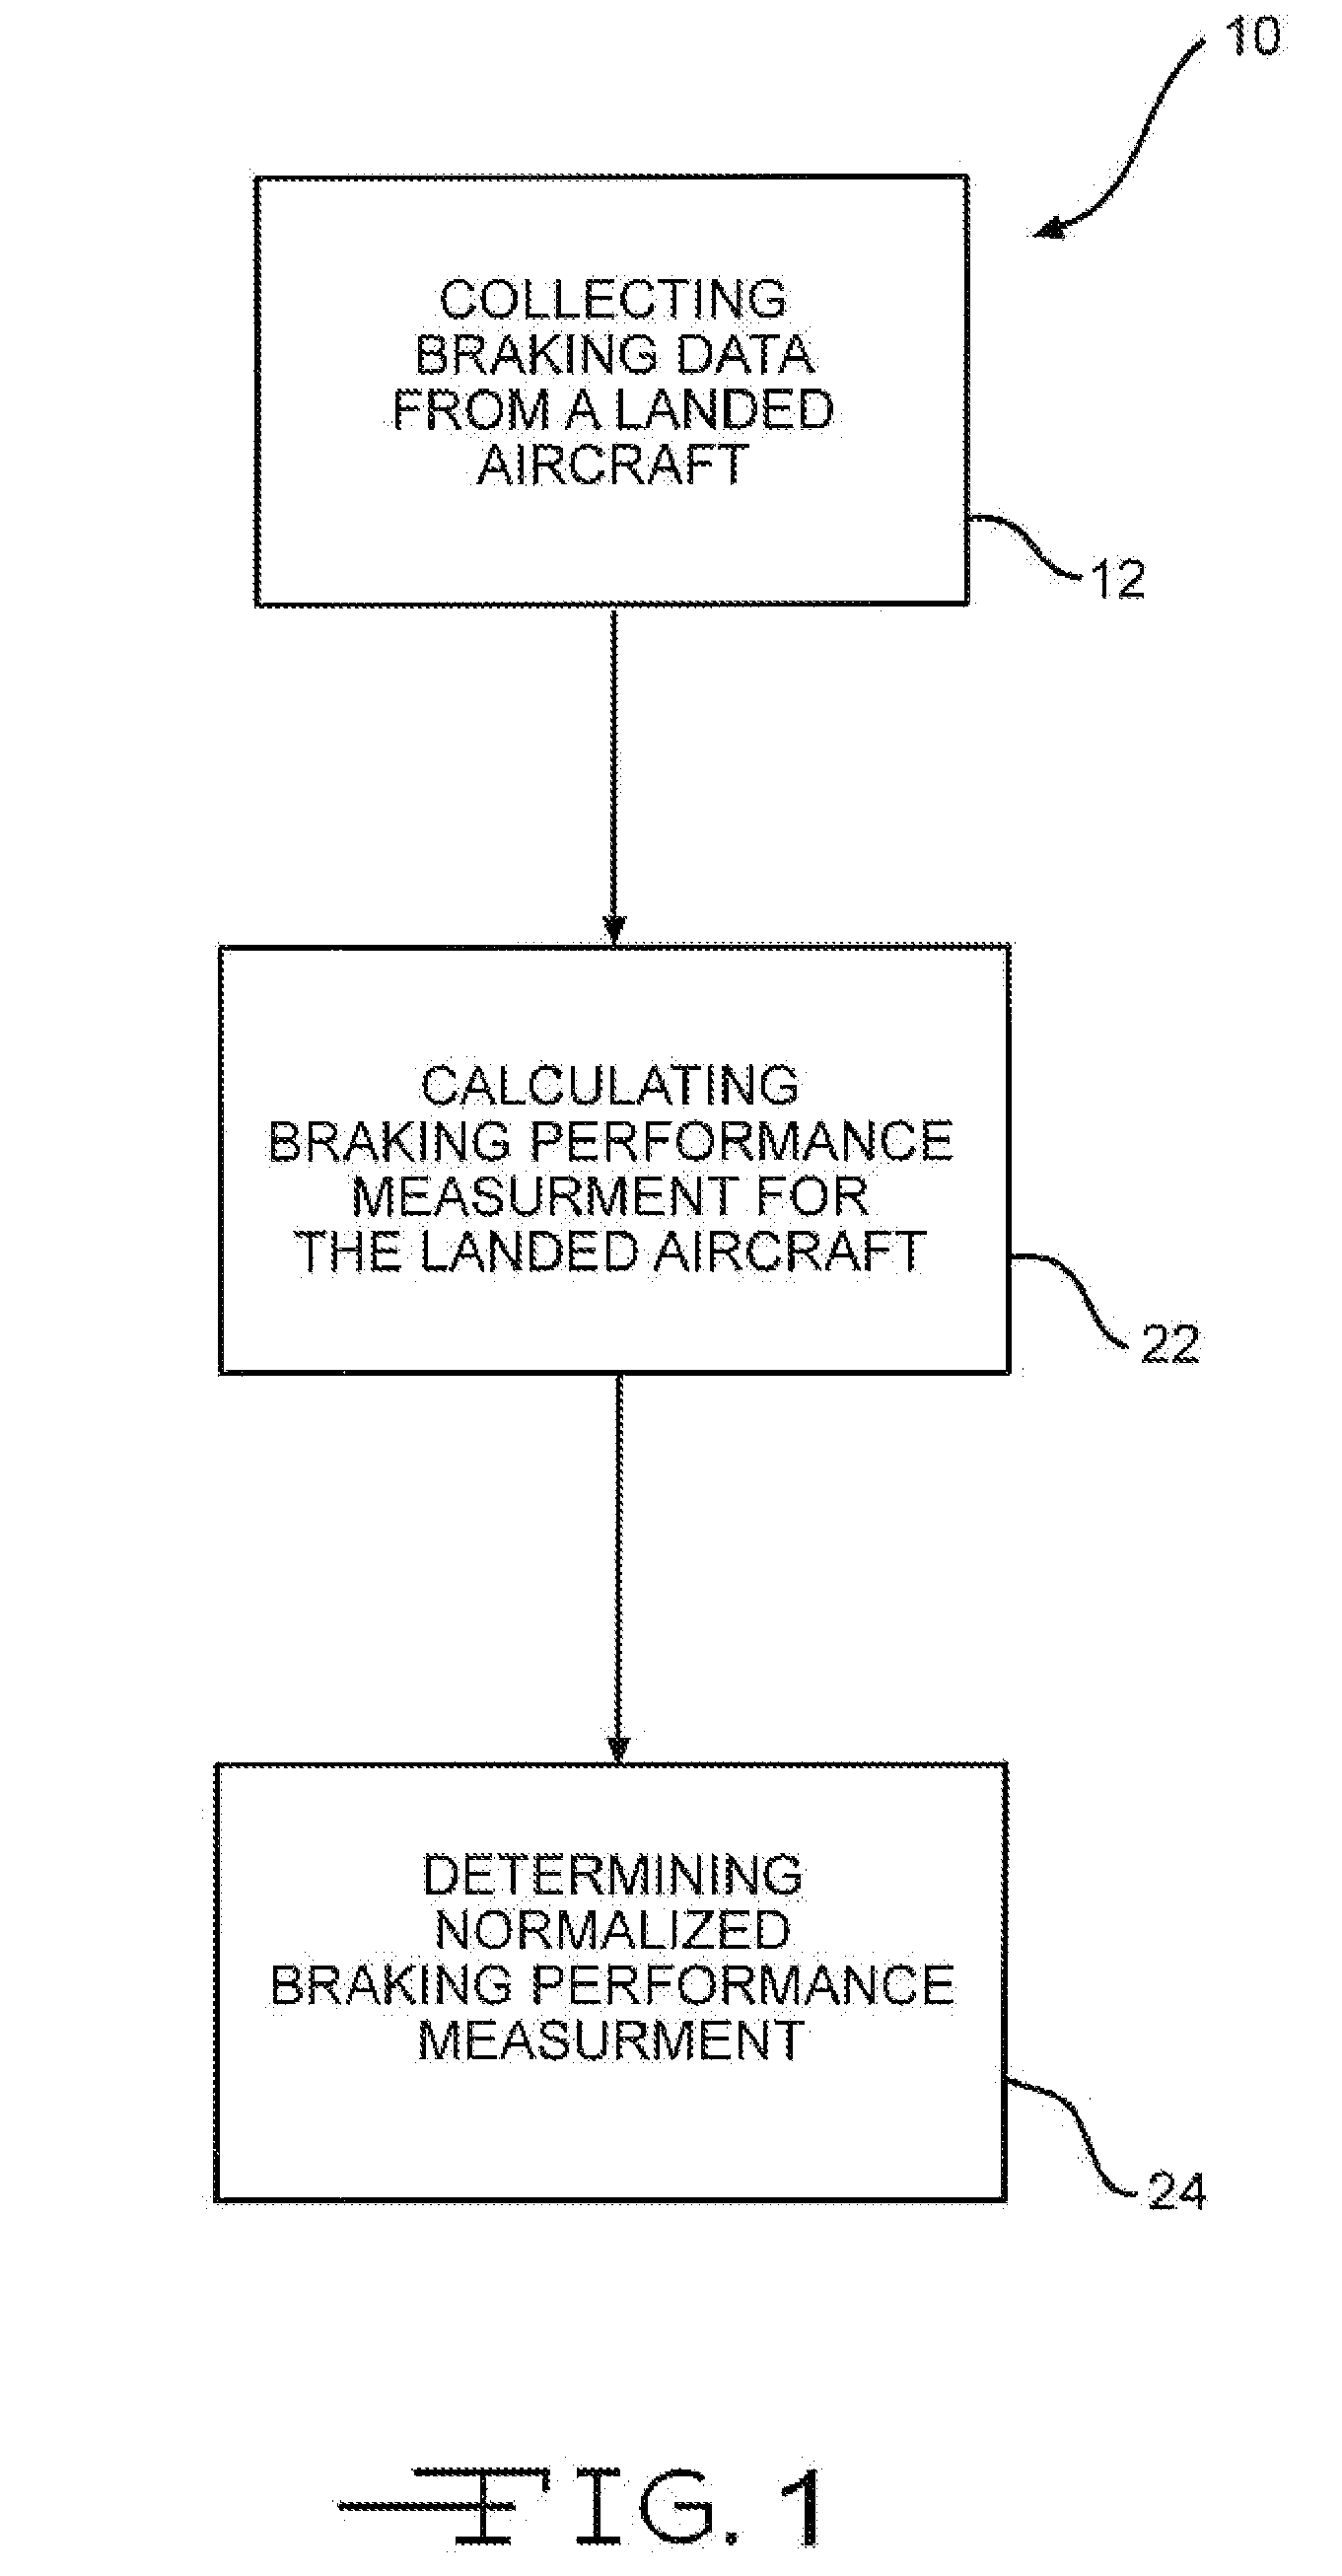 The determination of runway landing conditions